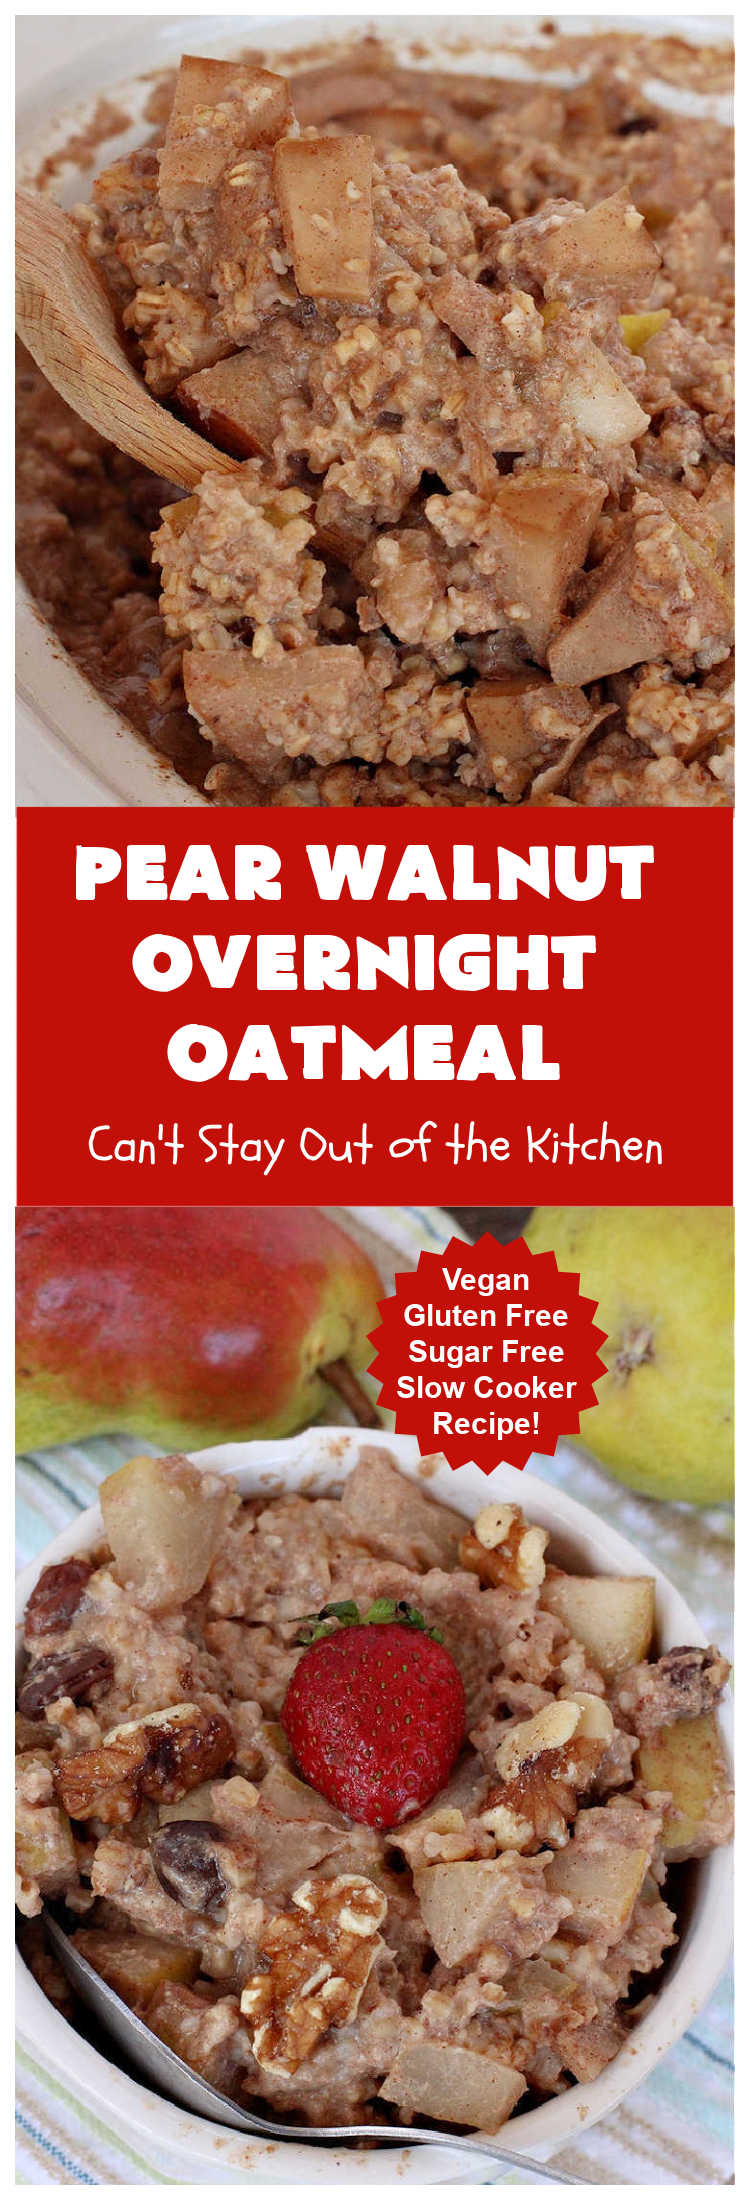 Pear Walnut Overnight Oatmeal | Can't Stay Out of the Kitchen | this delicious #oatmeal #recipe uses #pears, #bananas & #raisins to sweeten it so it's #SugarFree. Also #vegan #DairyFree & #GlutenFree. Terrific for a company or #holiday #breakfast & reheats easily. Perfect breakfast option if you have a programmable timer on your #SlowCooker. #walnuts #Crockpot #HolidayBreakfast #OvernightOatmeal #PearWalnutOvernightOatmeal